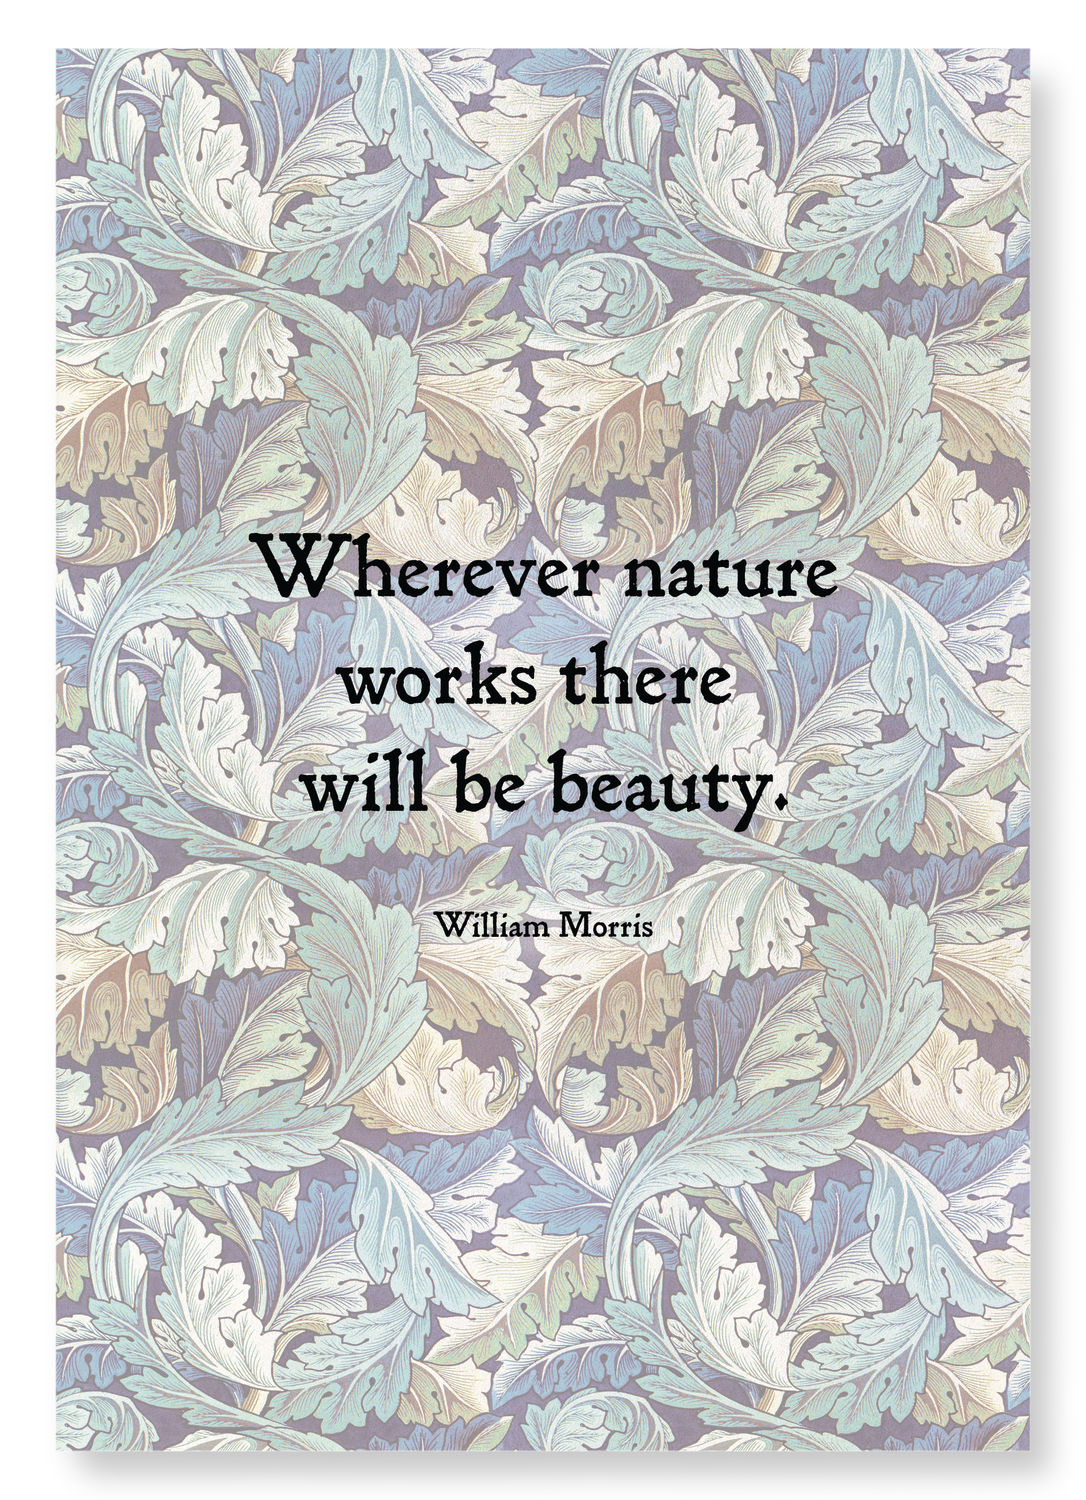 BEAUTY AND NATURE BY WILLIAM MORRIS